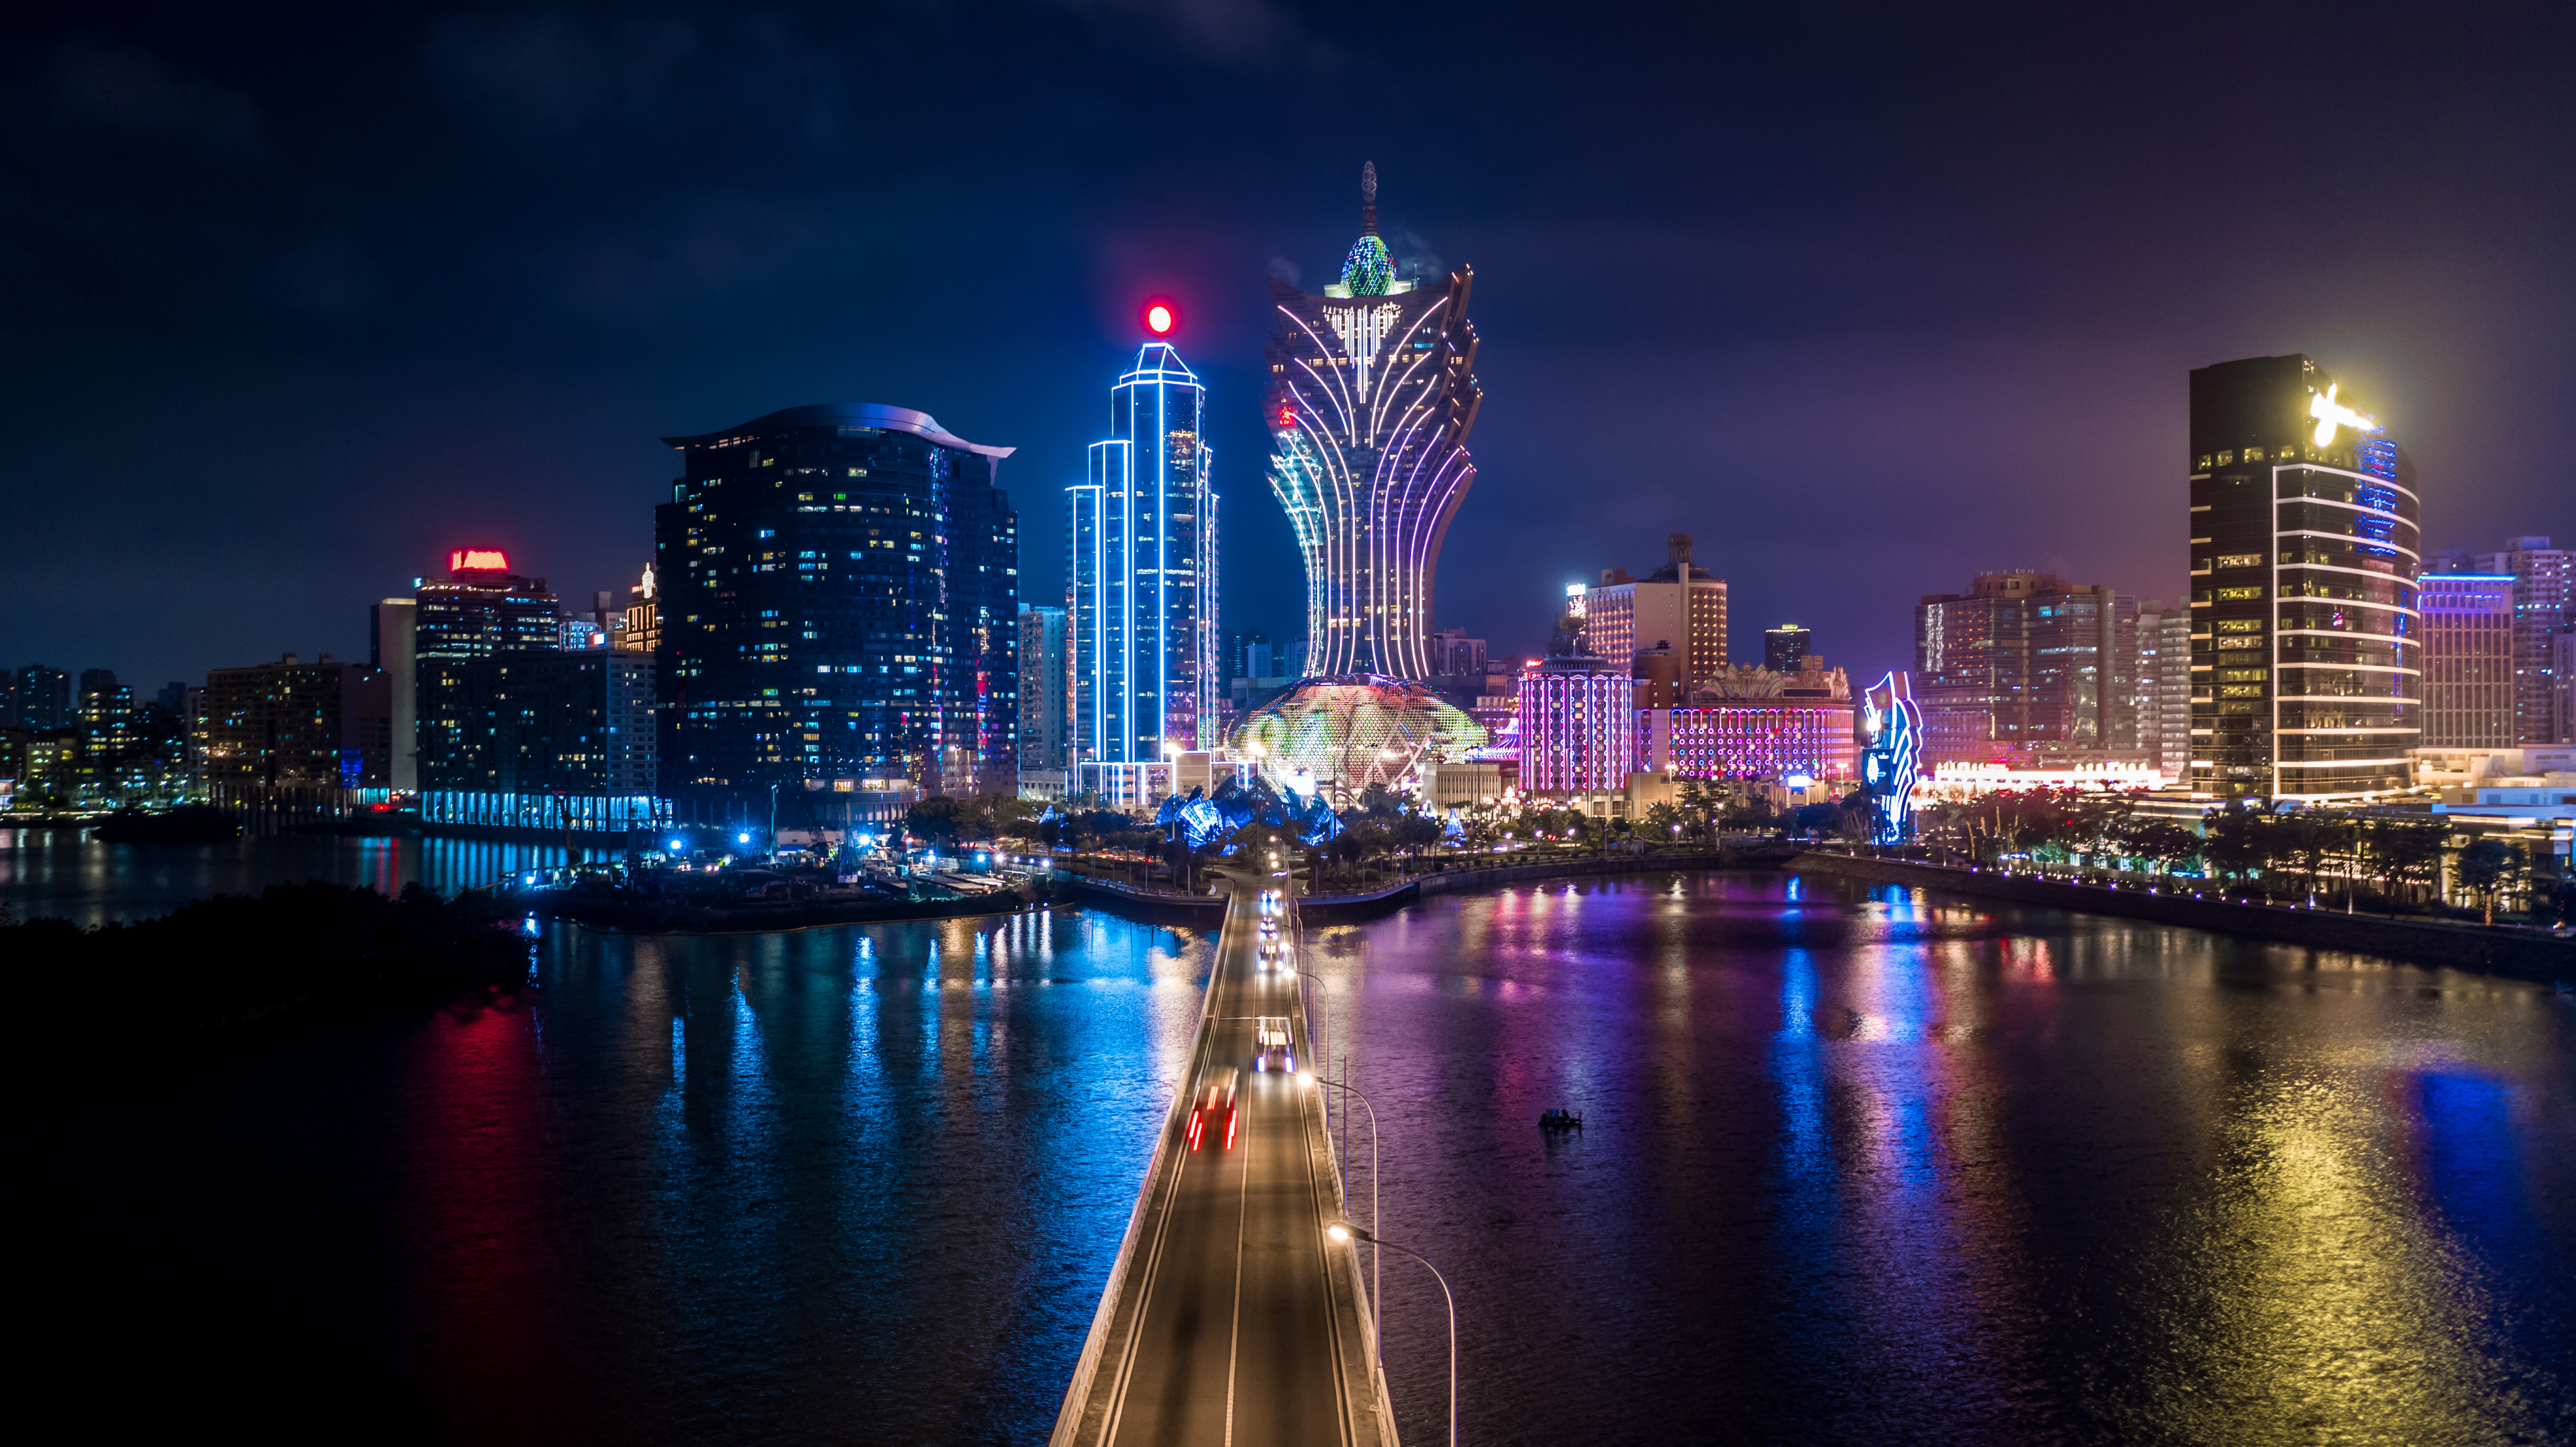 Macau’s skyline at night. China’s Ministry of Finance aims to help diversify the city’s economy into financial services through the bond offerings. Photo: Shutterstock